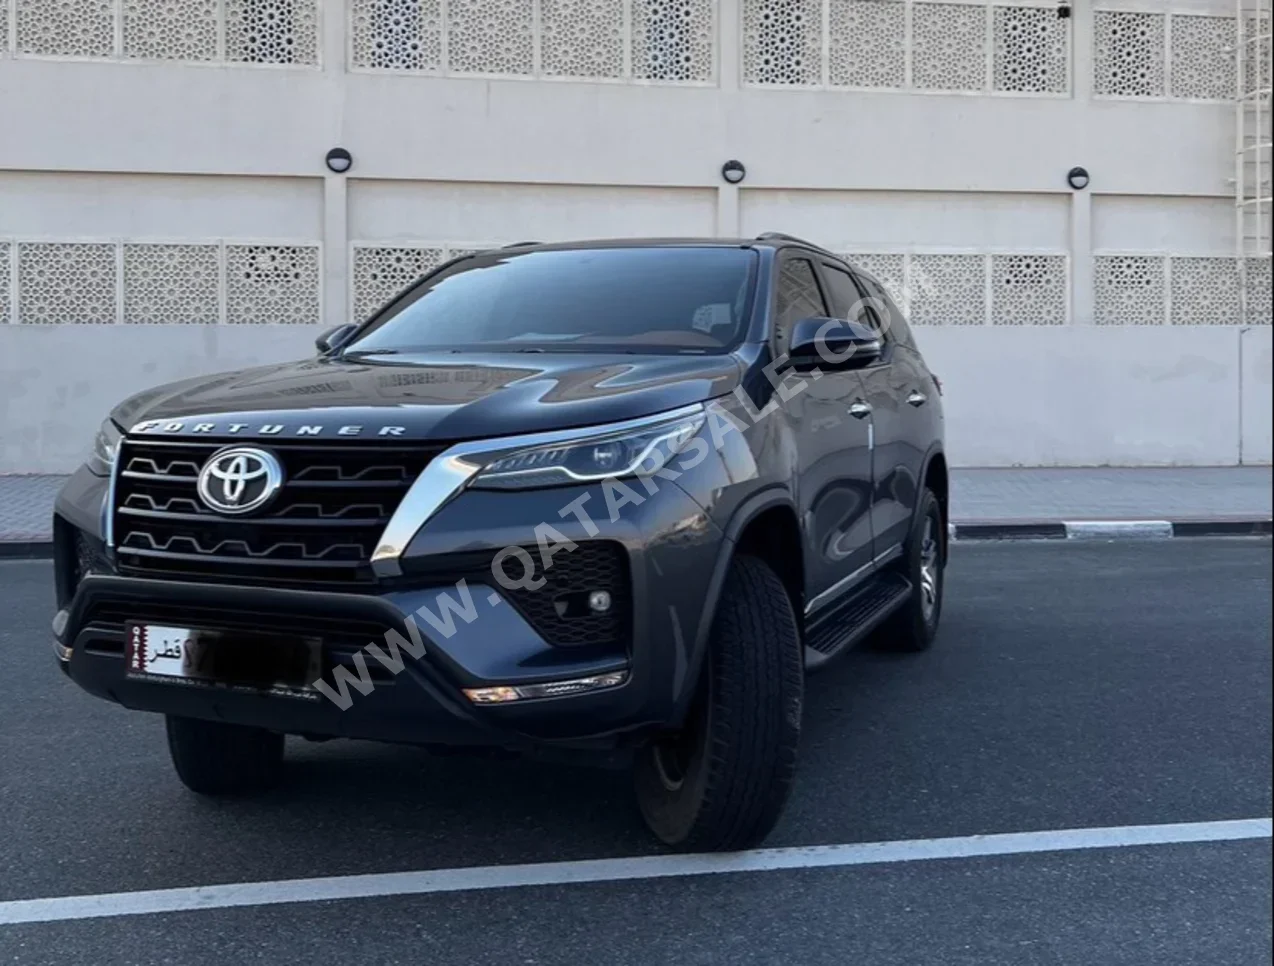 Toyota  Fortuner  SR5  2022  Automatic  39,000 Km  6 Cylinder  Four Wheel Drive (4WD)  SUV  Dark Gray  With Warranty